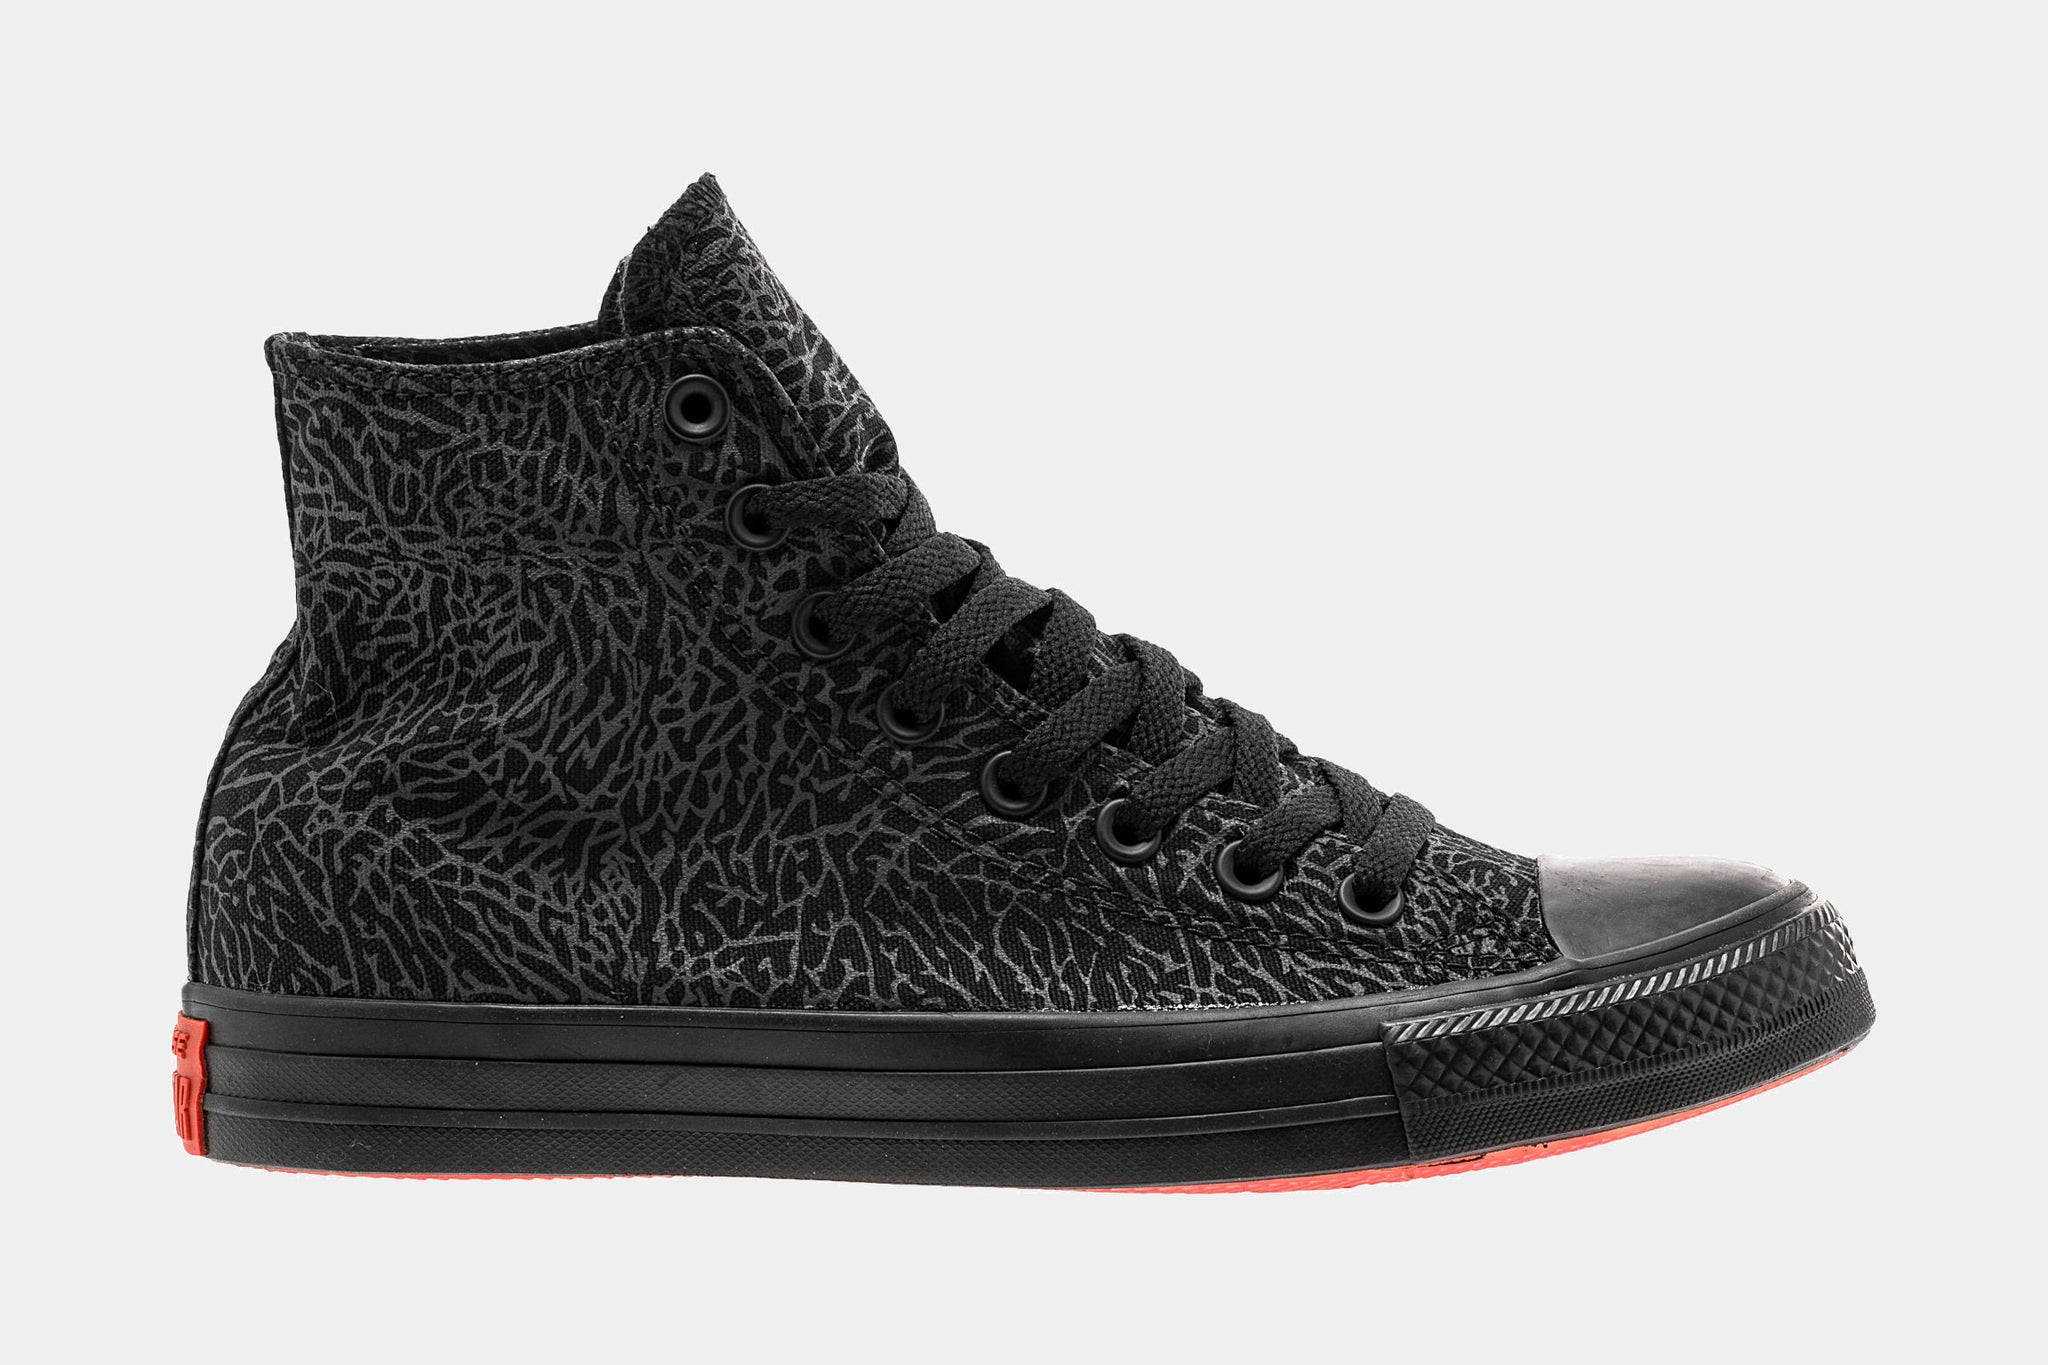 Converse Palace X Converse Collab SP 23 Anniversary Chuck Taylor All Star Elephant Print Mens Lifetyle Shoe Black Free Shipping 156445C